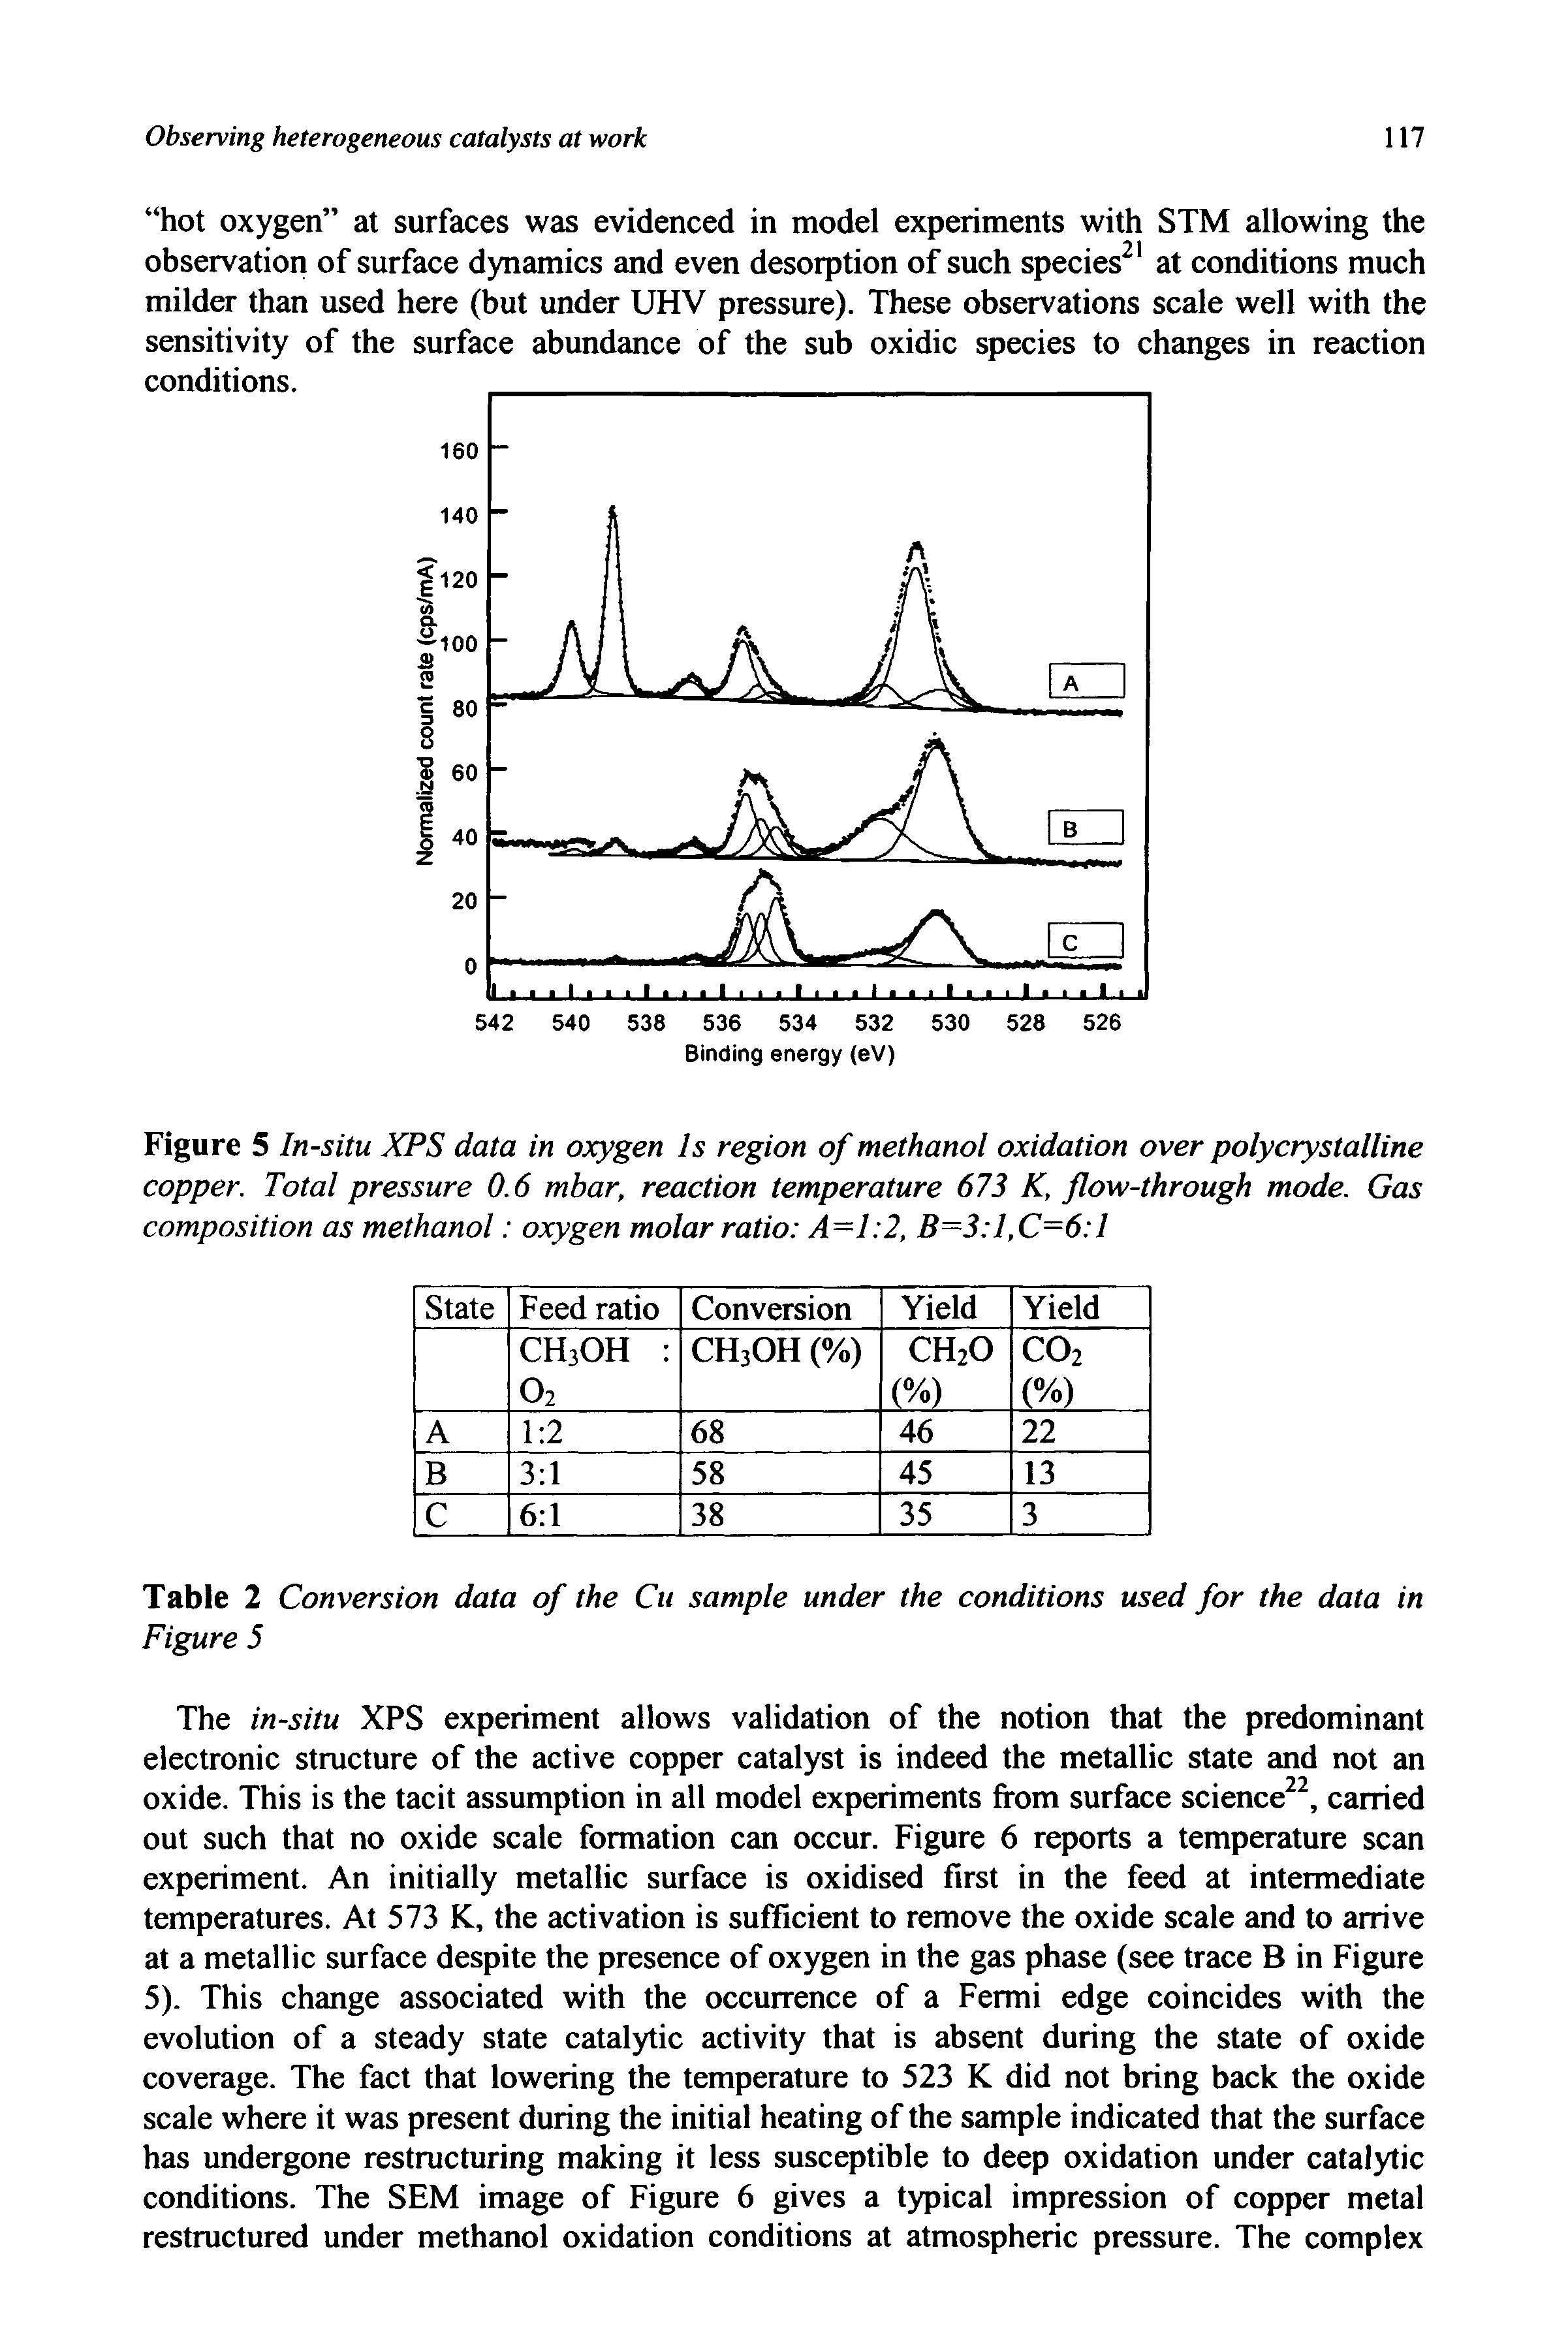 Figure 5 In-situ XPS data in oxygen Is region of methanol oxidation over polycrystalline copper. Total pressure 0.6 mbar, reaction temperature 673 K, flow-through mode. Gas composition as methanol oxygen molar ratio A—1 2, B—3 1,C=6 1...